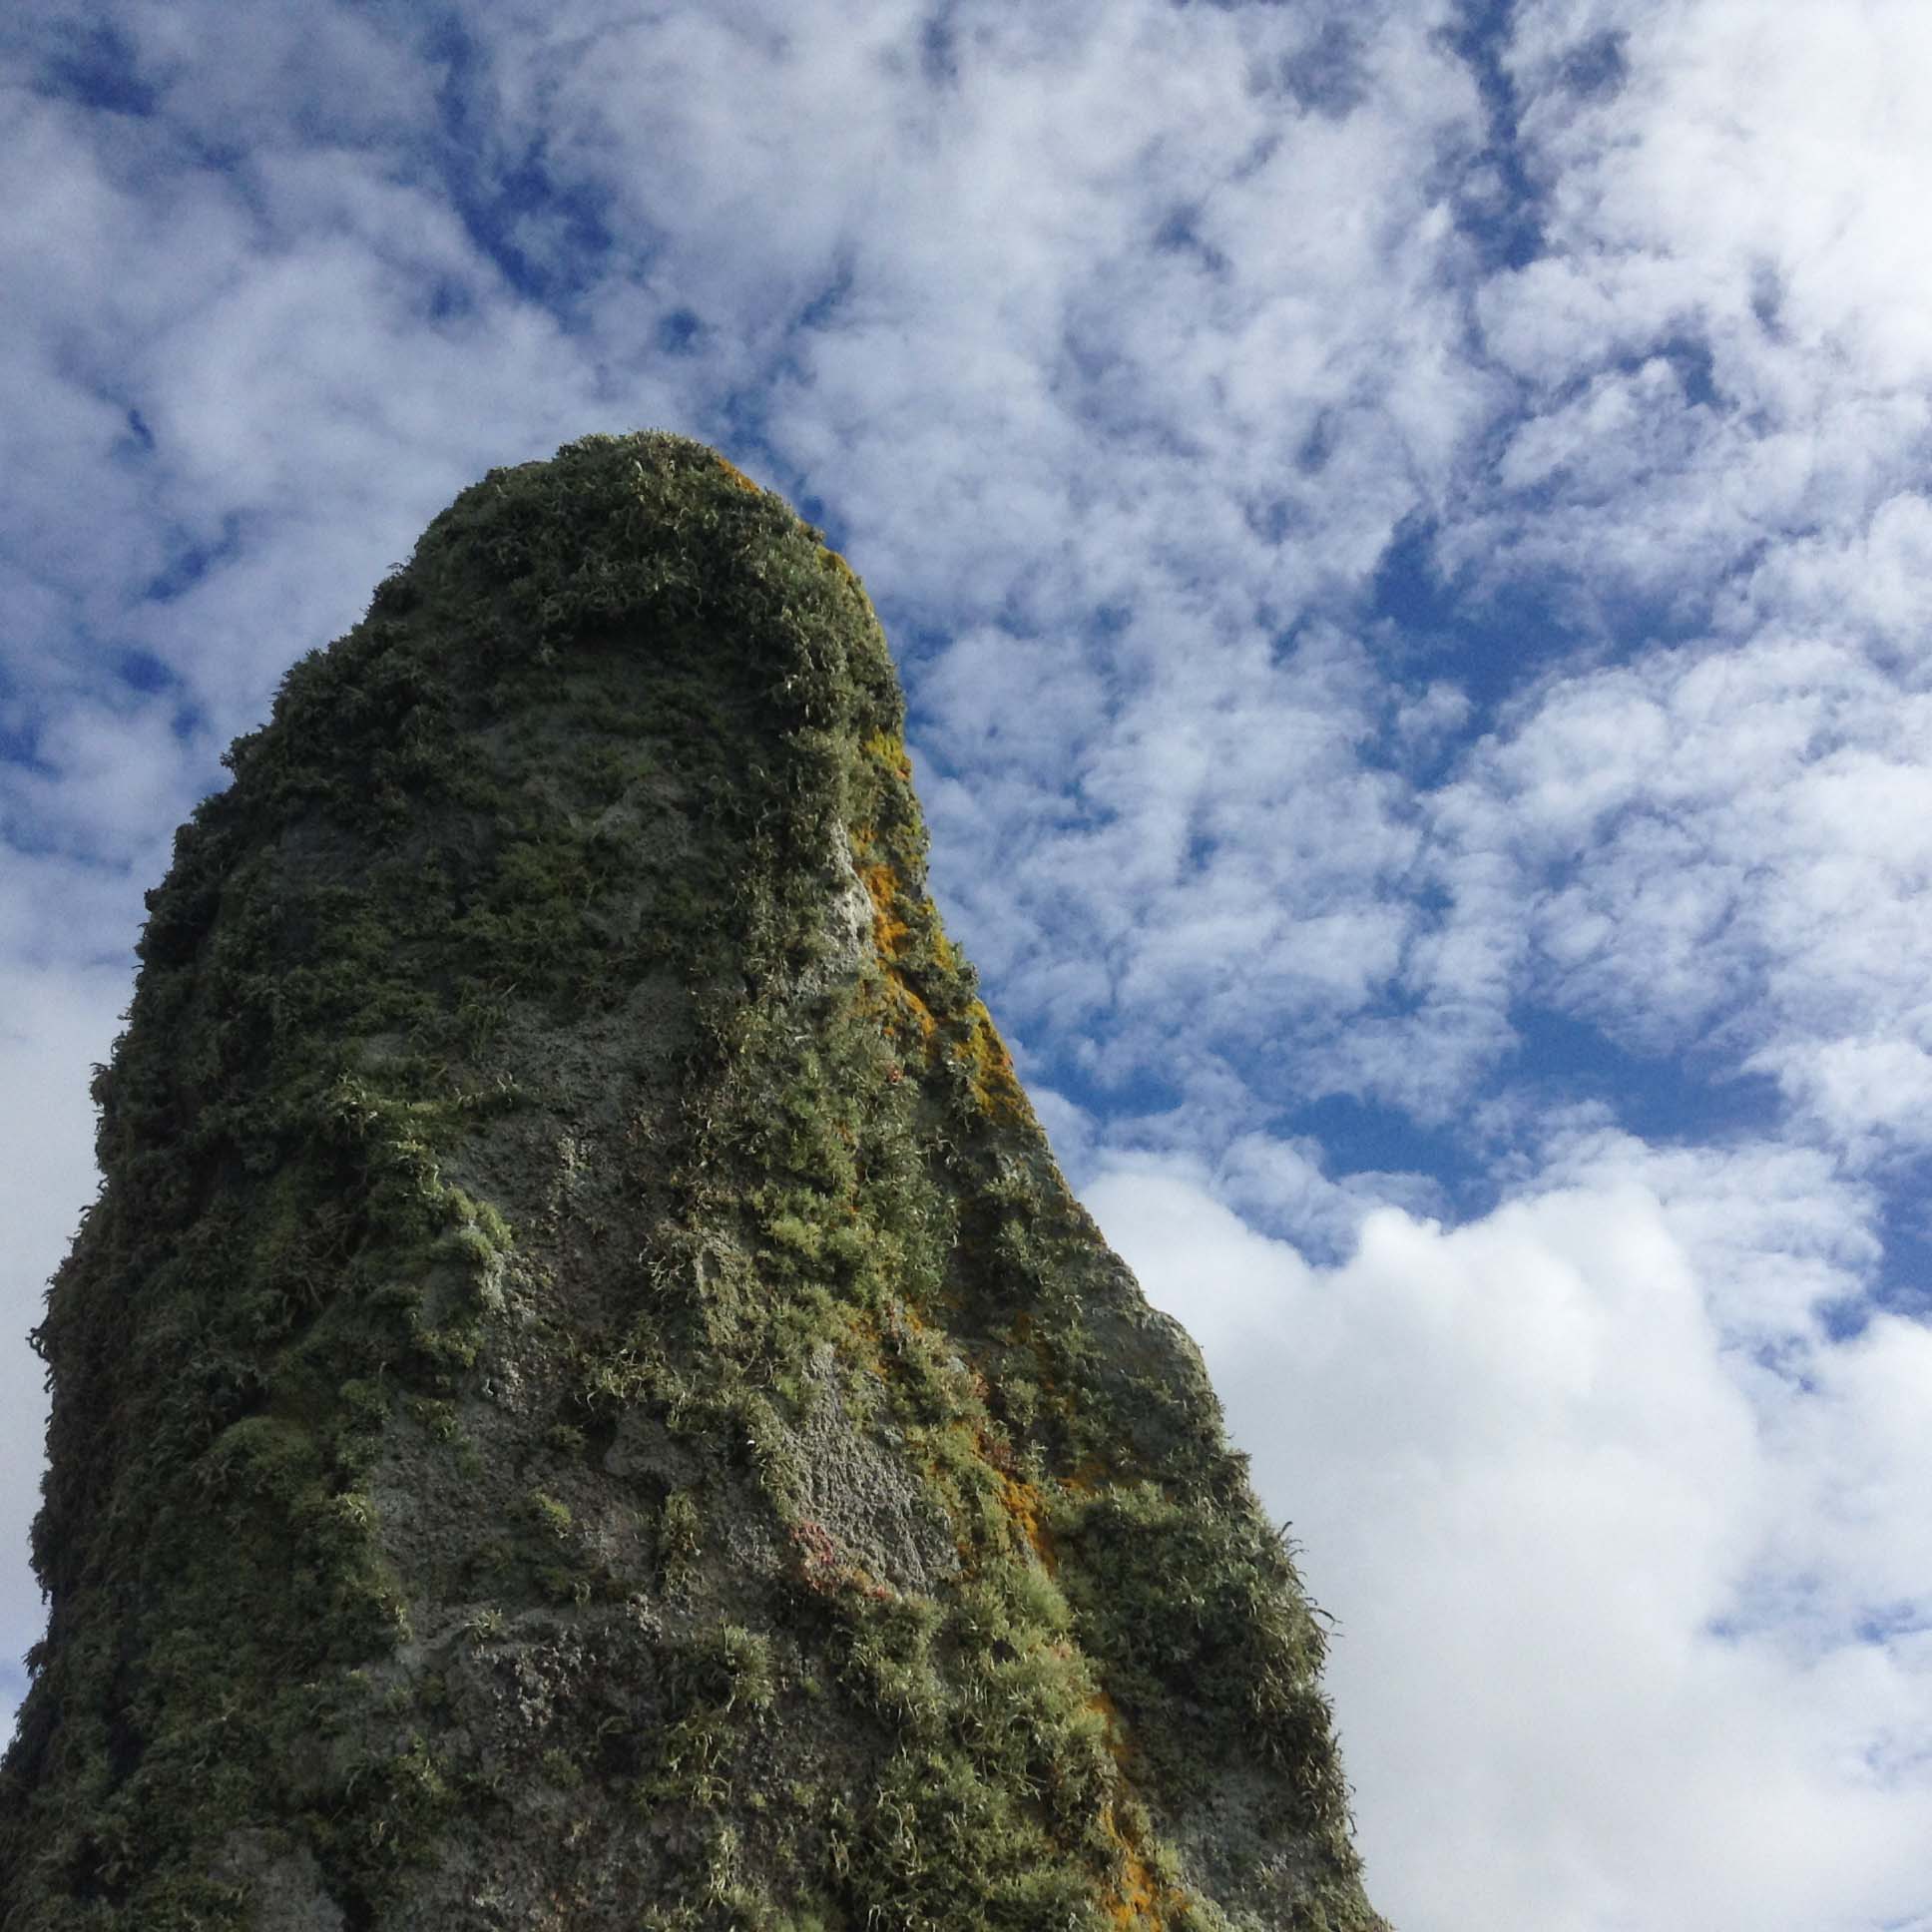 Moss-covered standing stone silhouetted against clouds and blue sky